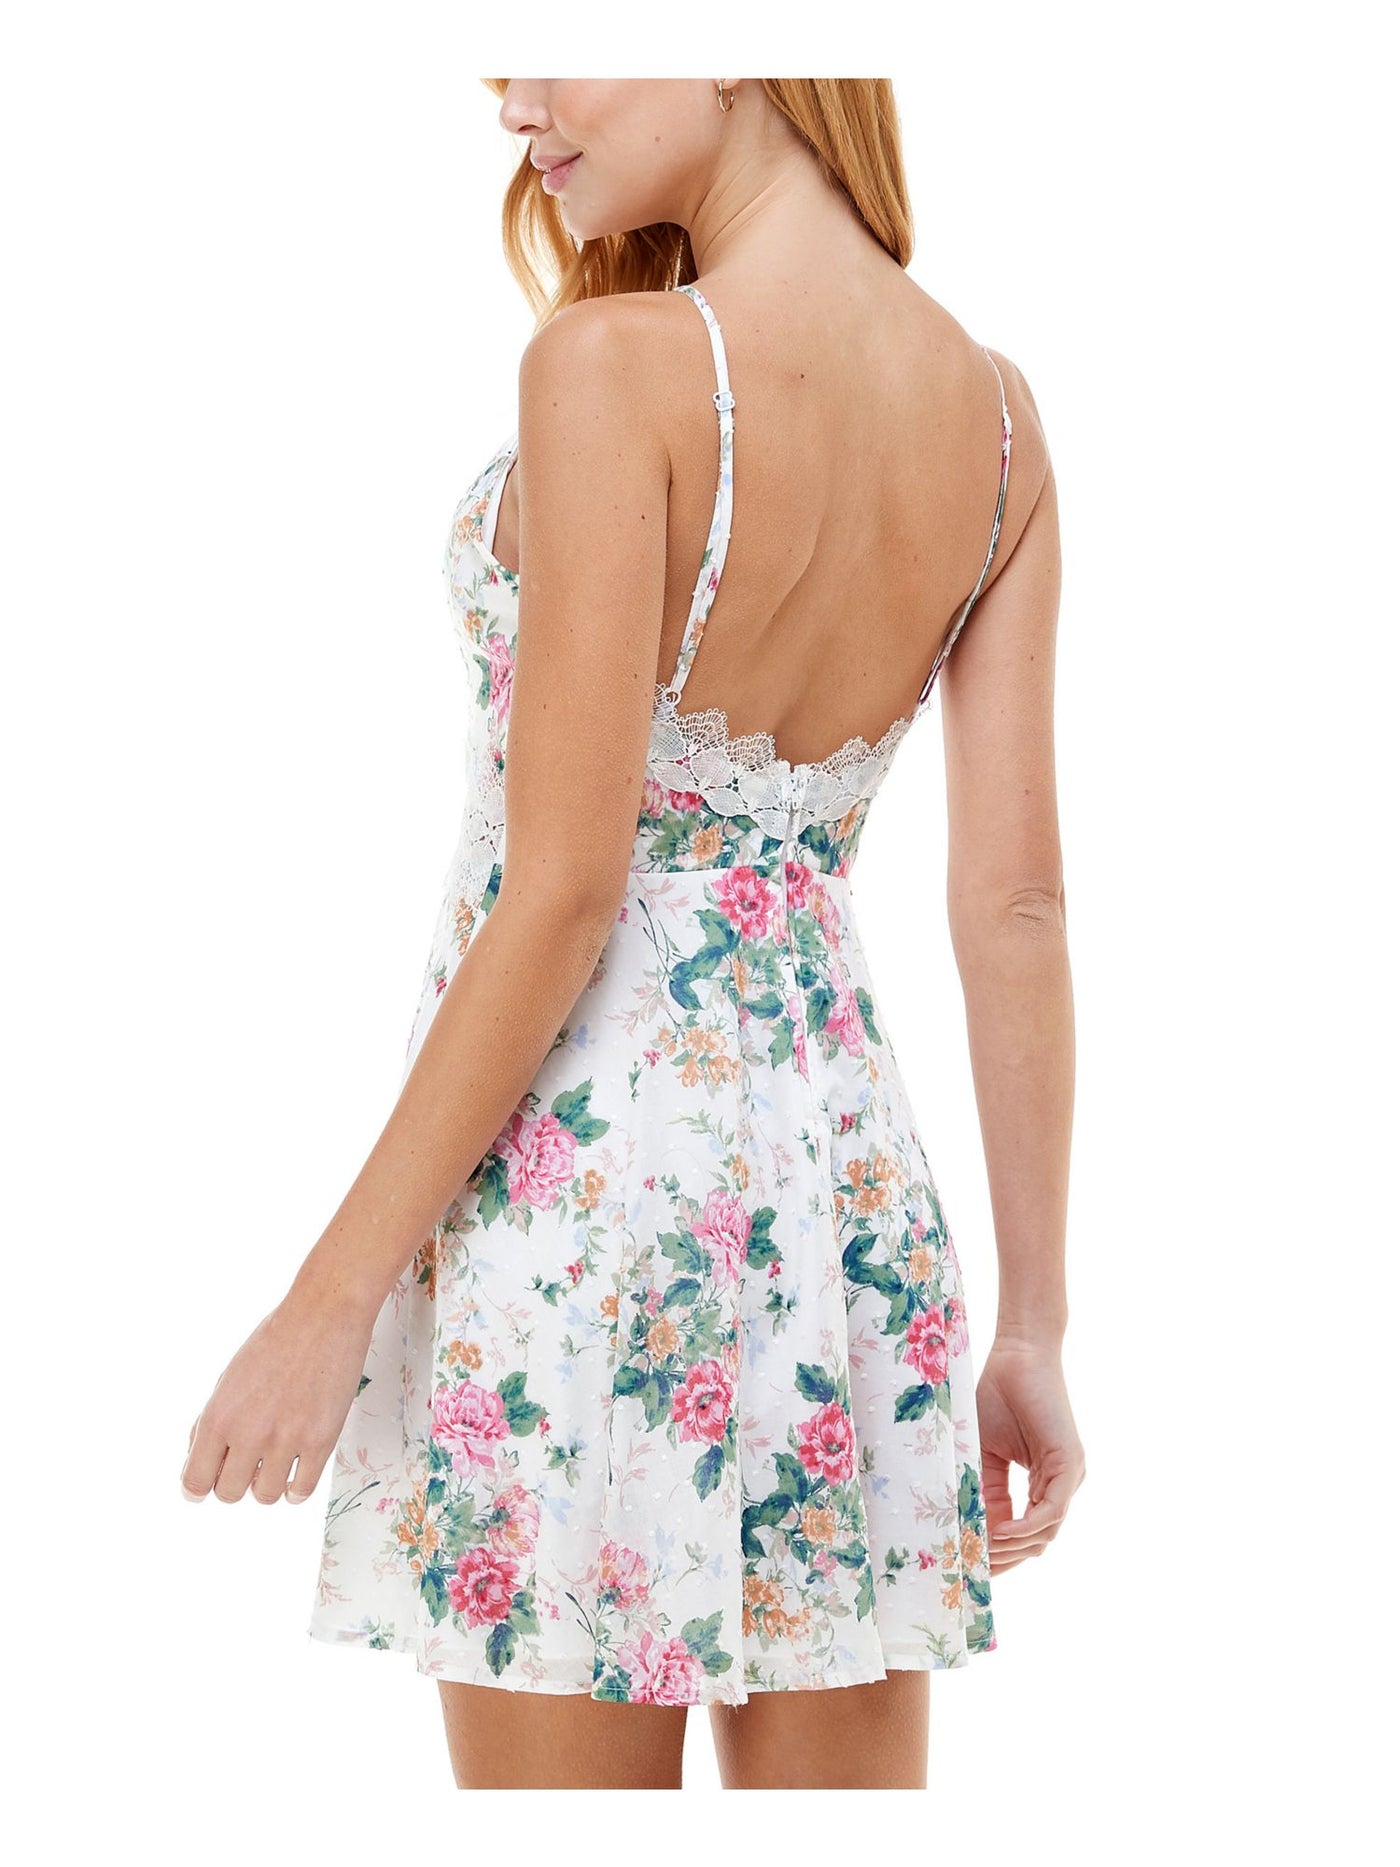 CITY STUDIO Womens Ivory Floral Halter Above The Knee Fit + Flare Dress Juniors 9